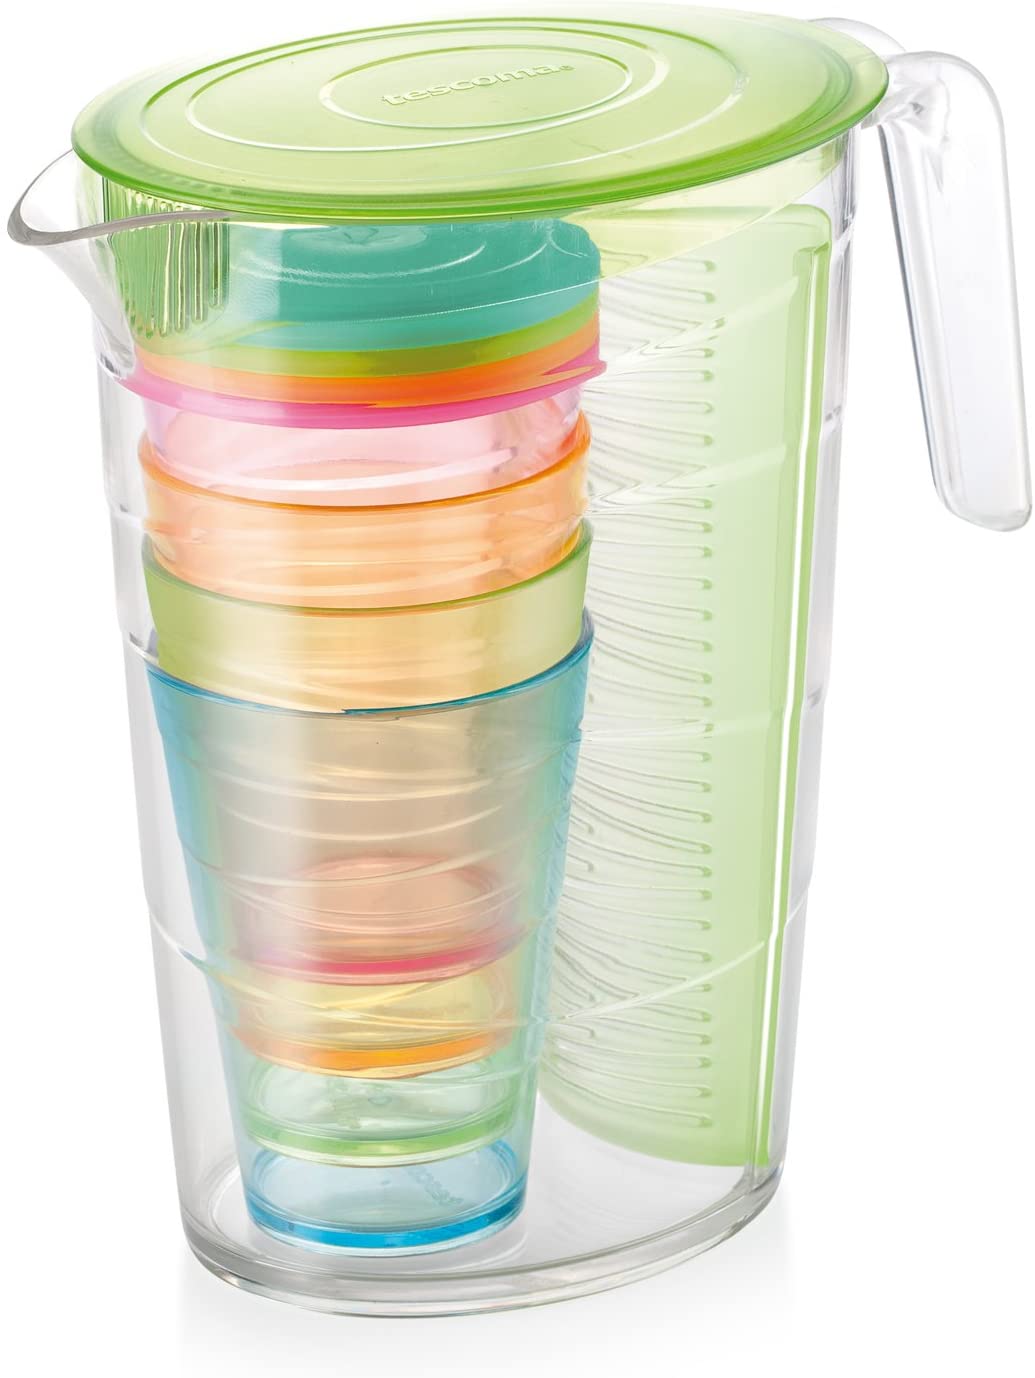 Tescoma Mydrink 308802.25 Jug 2.5 l drinking cup with lid, Plastic, green, 23 x 13 x 23.2 cm 1 Unit